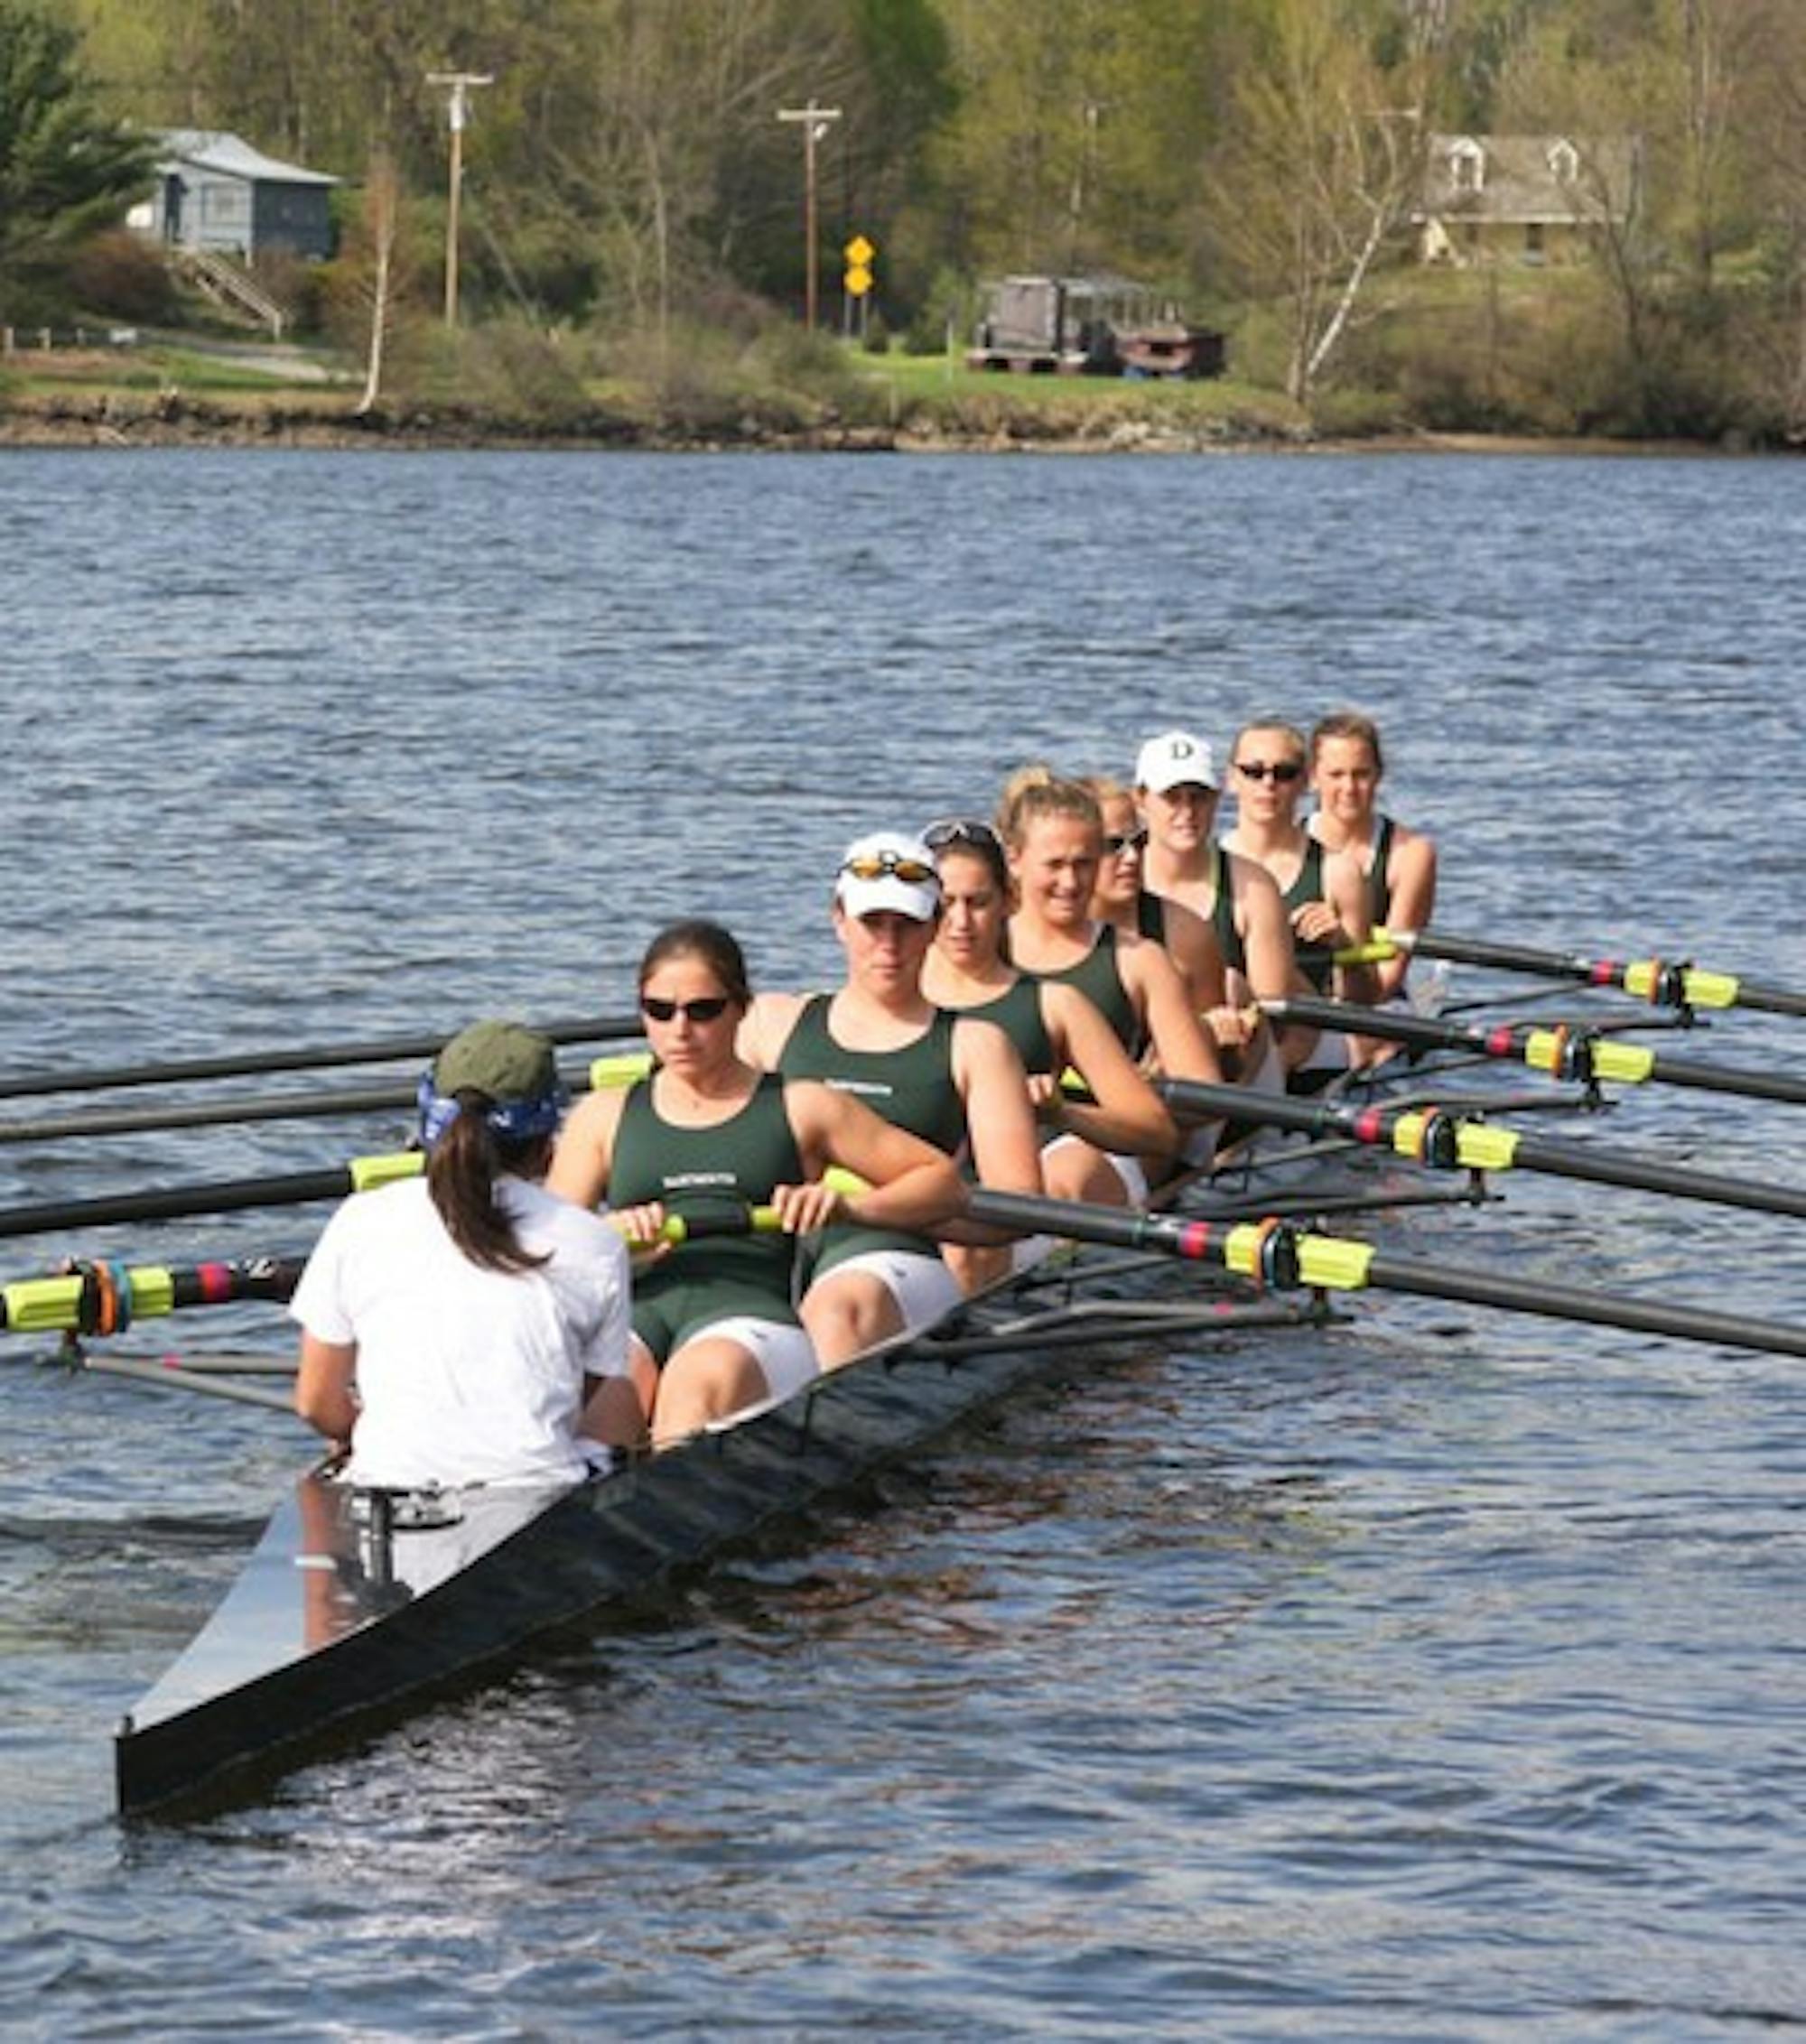 Dartmouth's crews will compete in championship events this weekend.